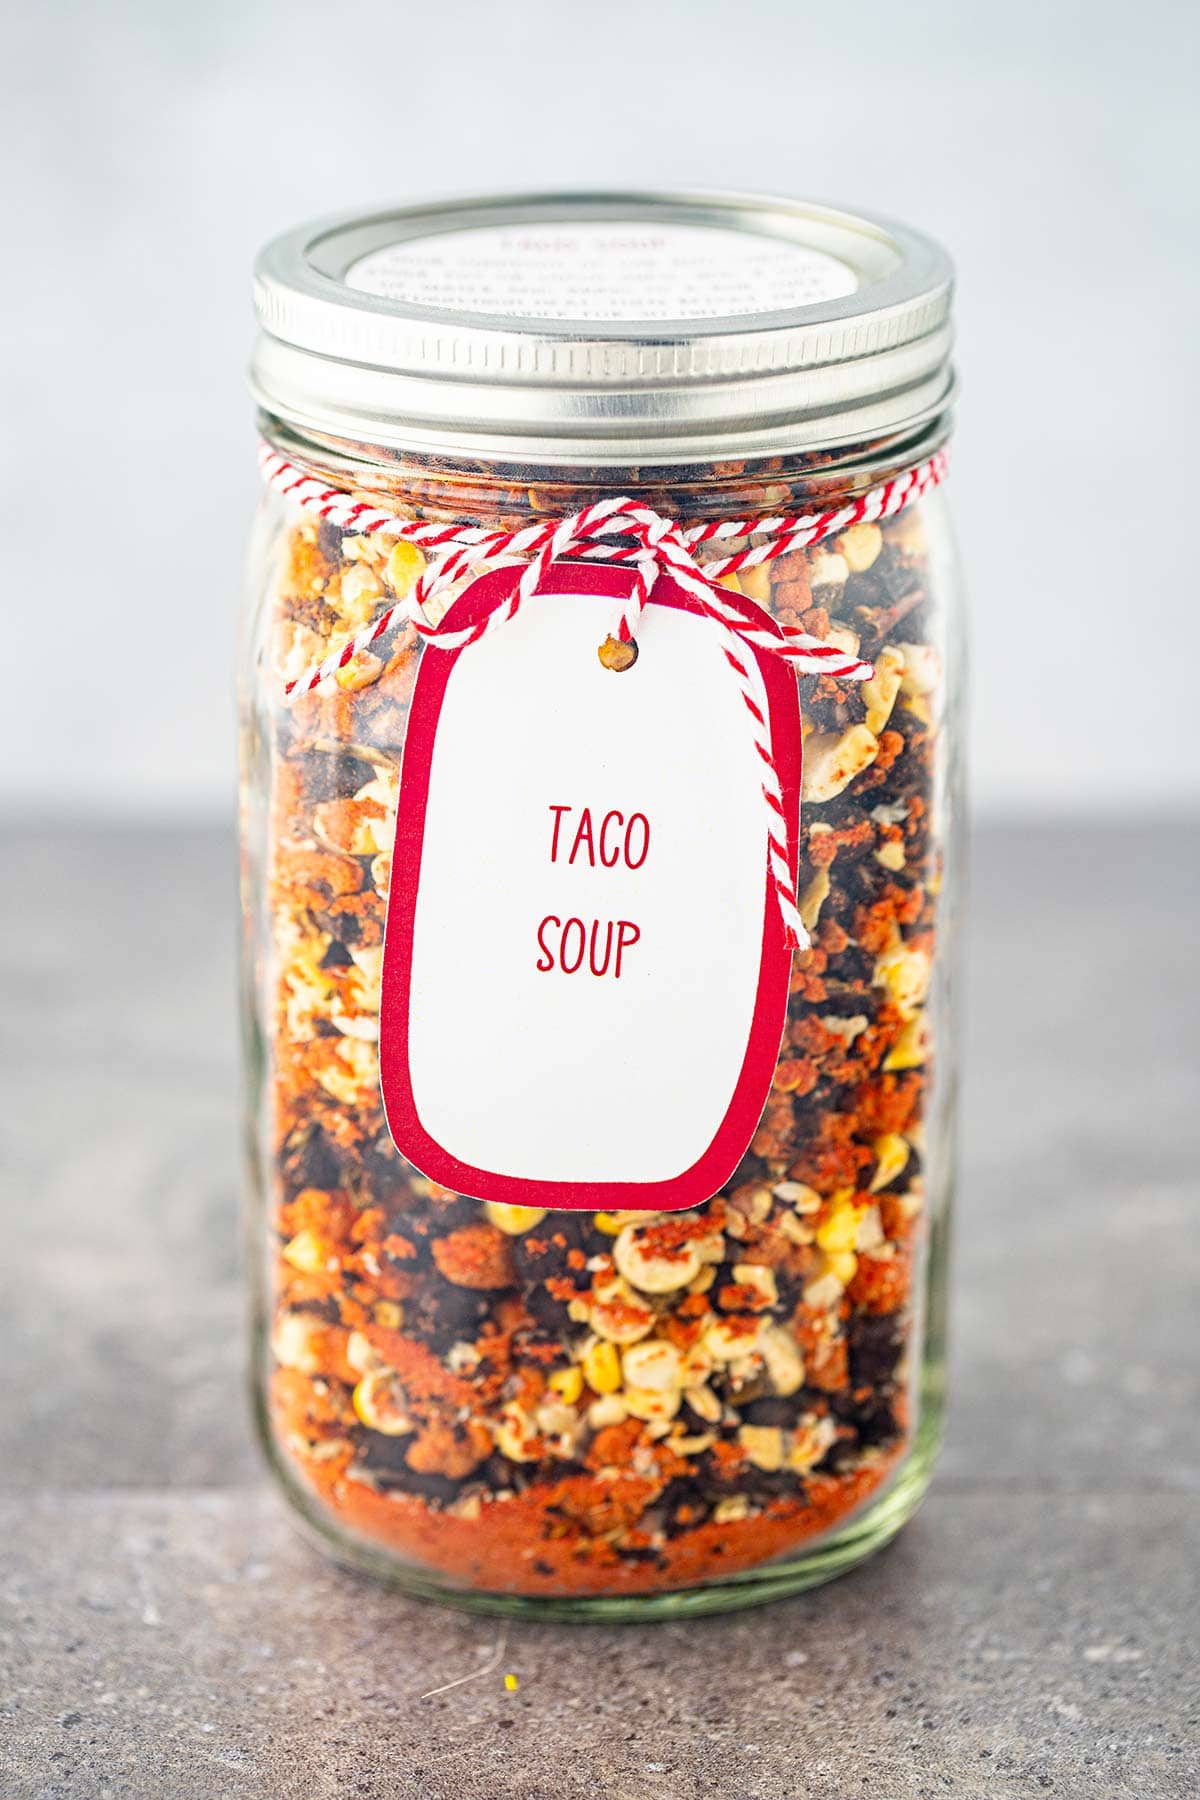 34 Delicious Mason Jar Gift Ideas for Everyone on Your List